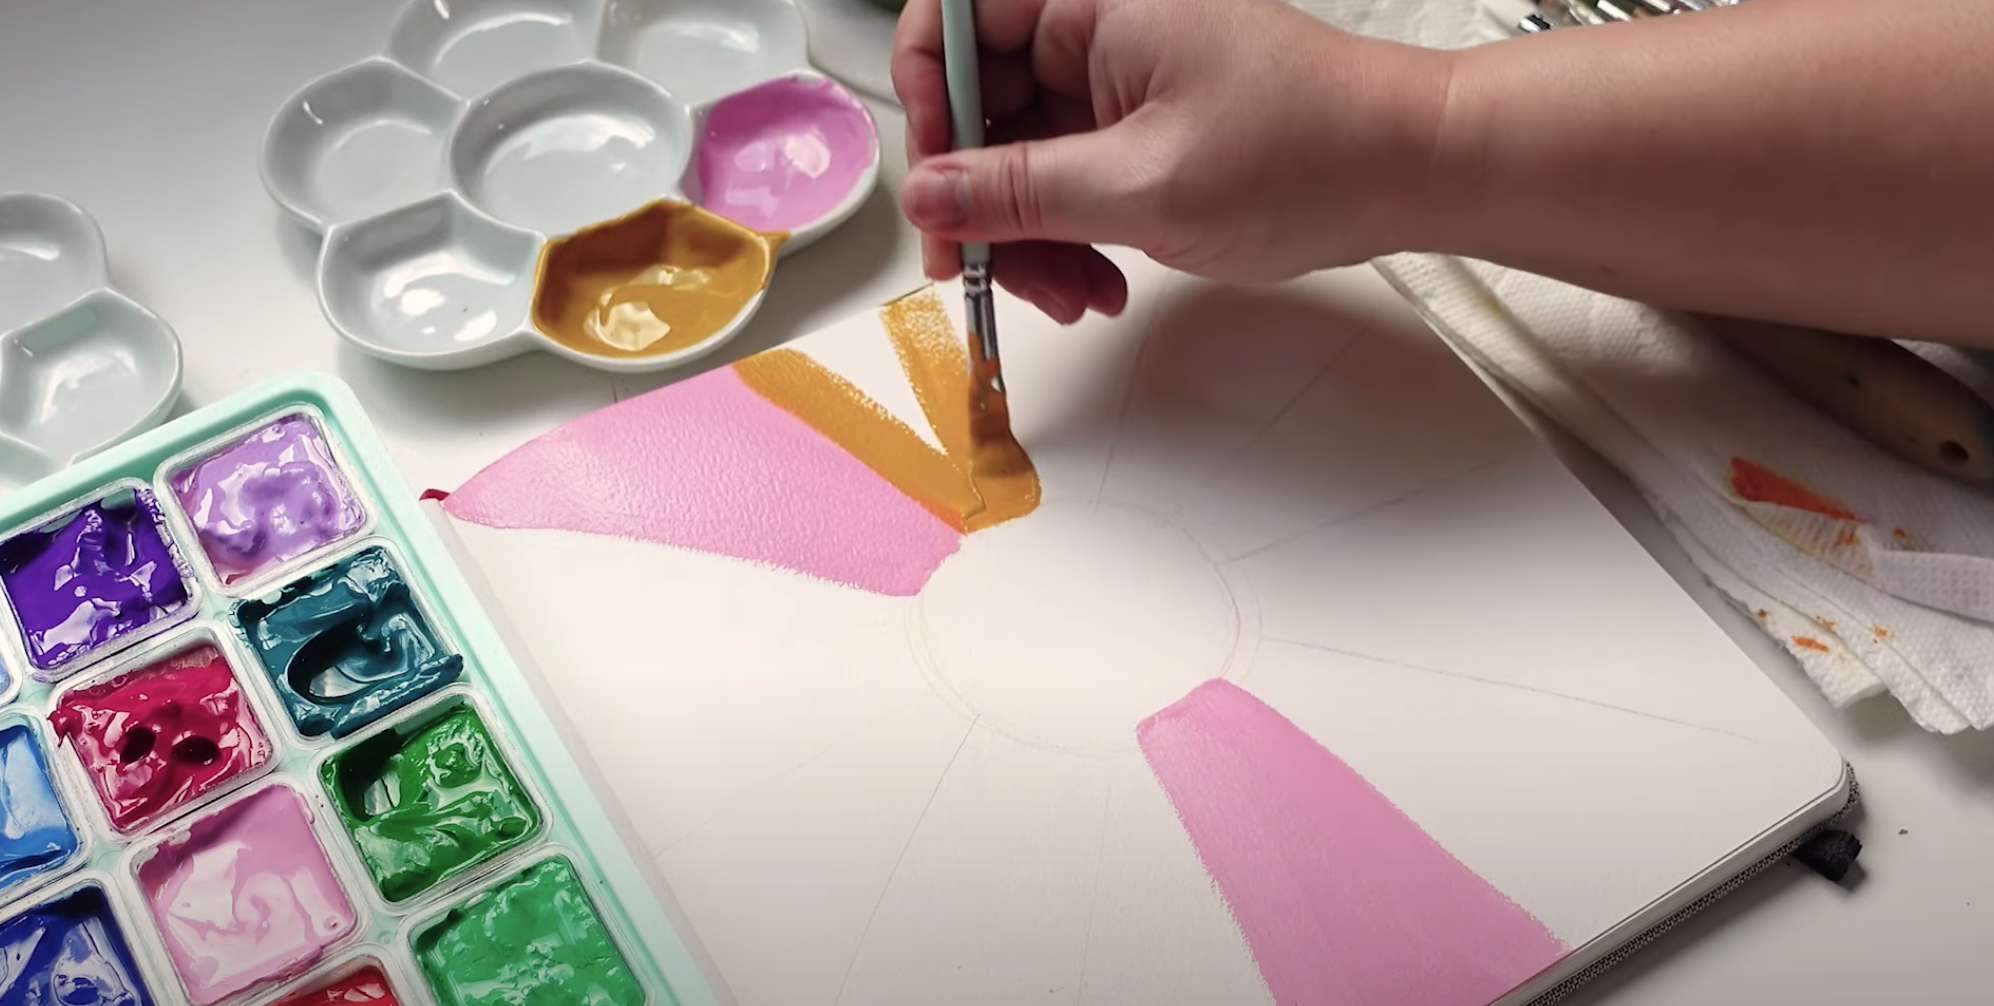 Himi 24 Jelly Gouache Review 